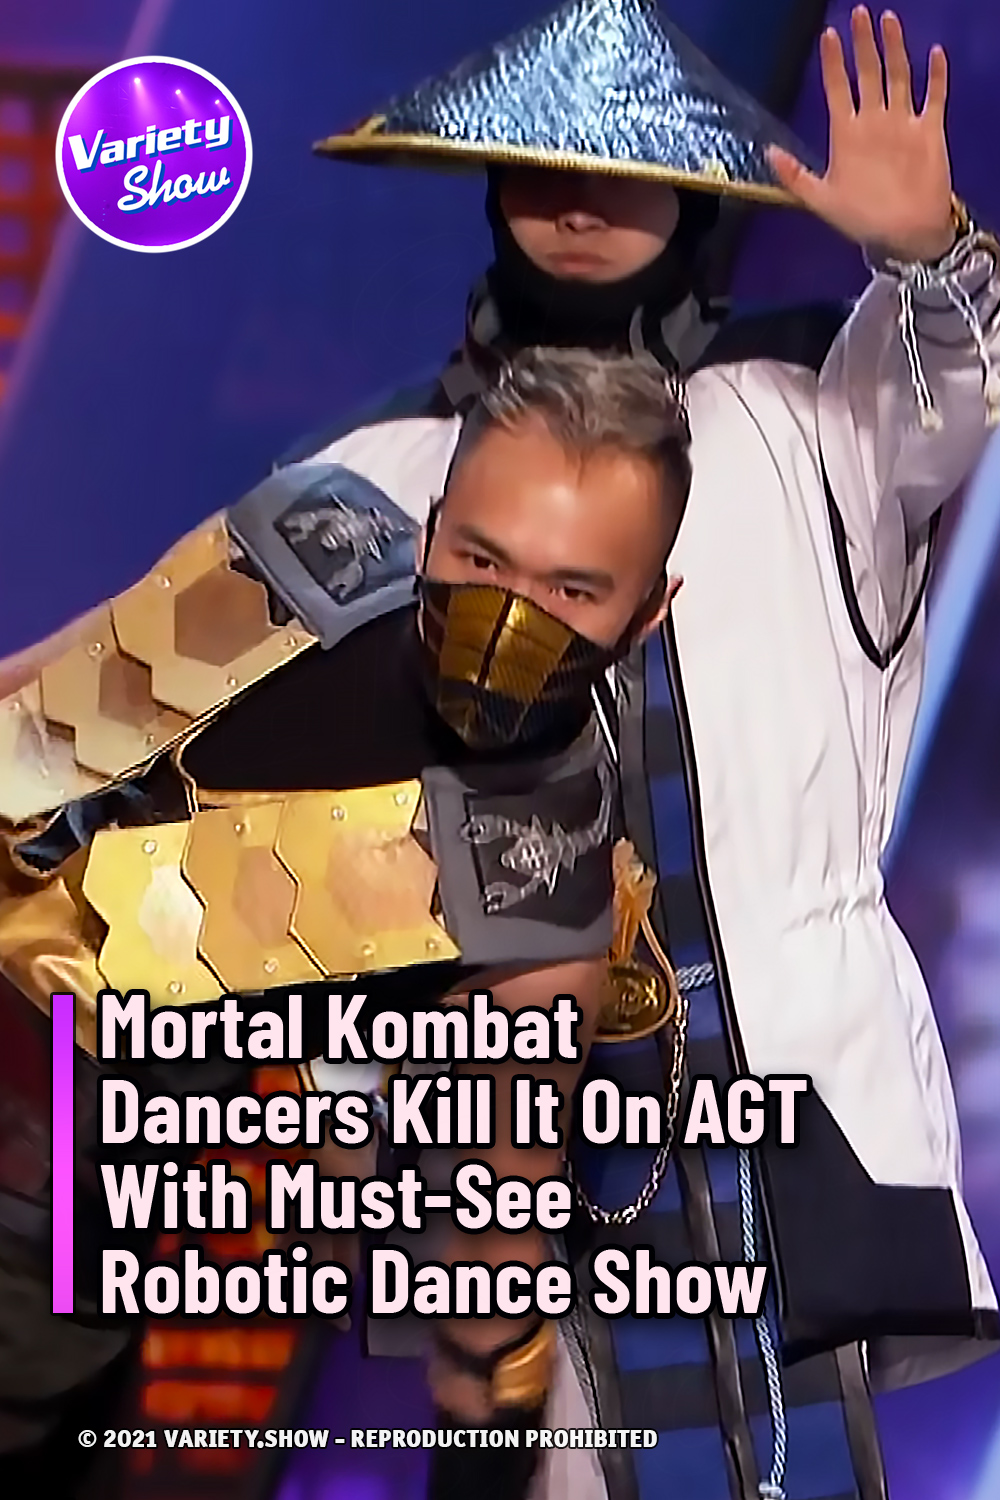 Mortal Kombat Dancers Kill It On AGT With Must-See Robotic Dance Show